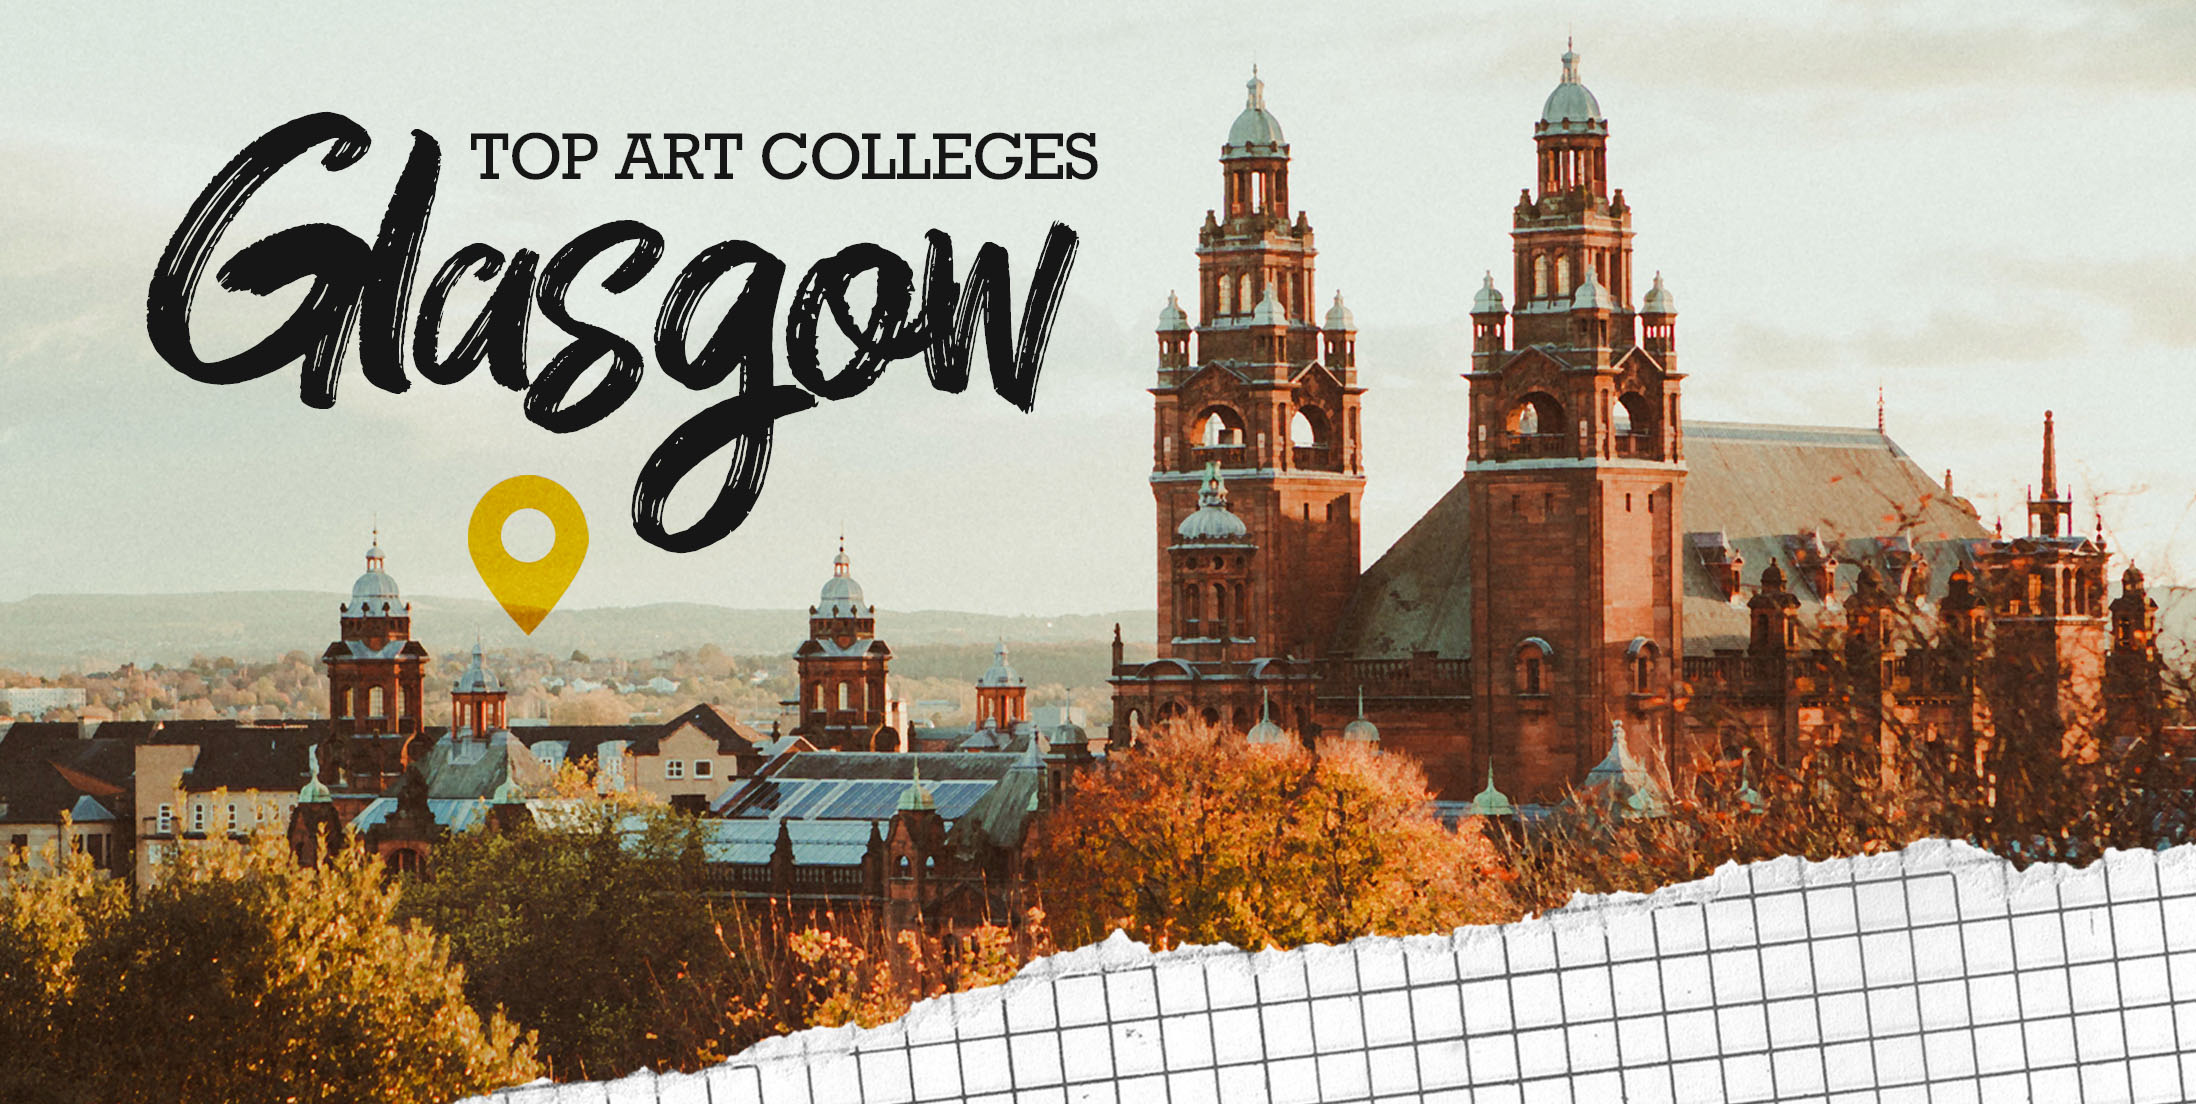 Top Art Colleges in Glasgow